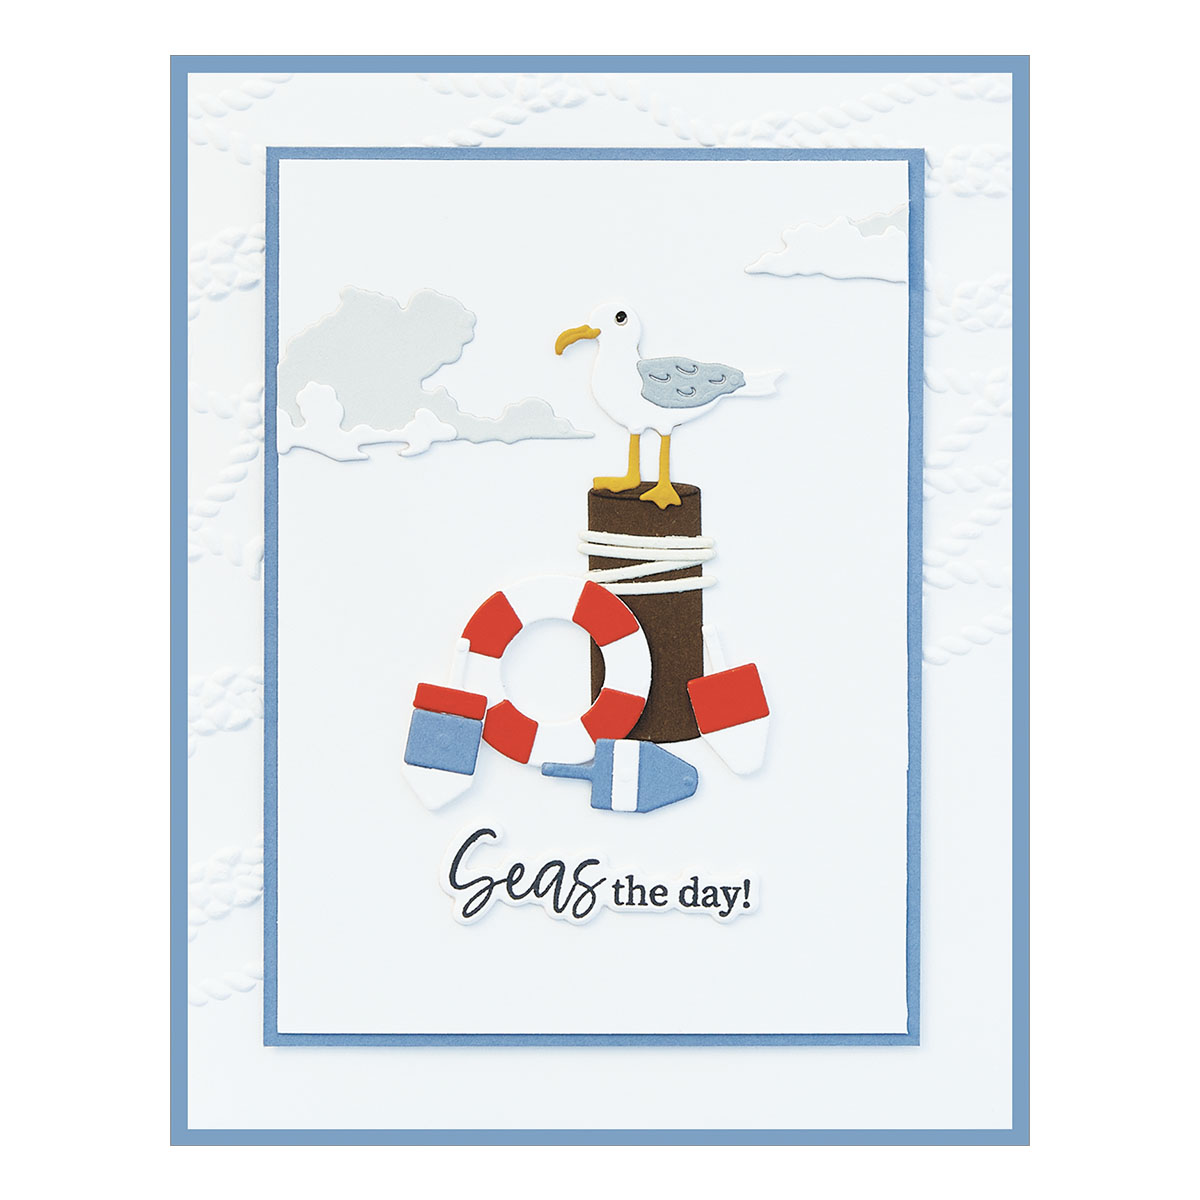 Spellbinders Oh, Buoy! Etched Dies From the Fair Winds Collection By Dawn Woleslagle